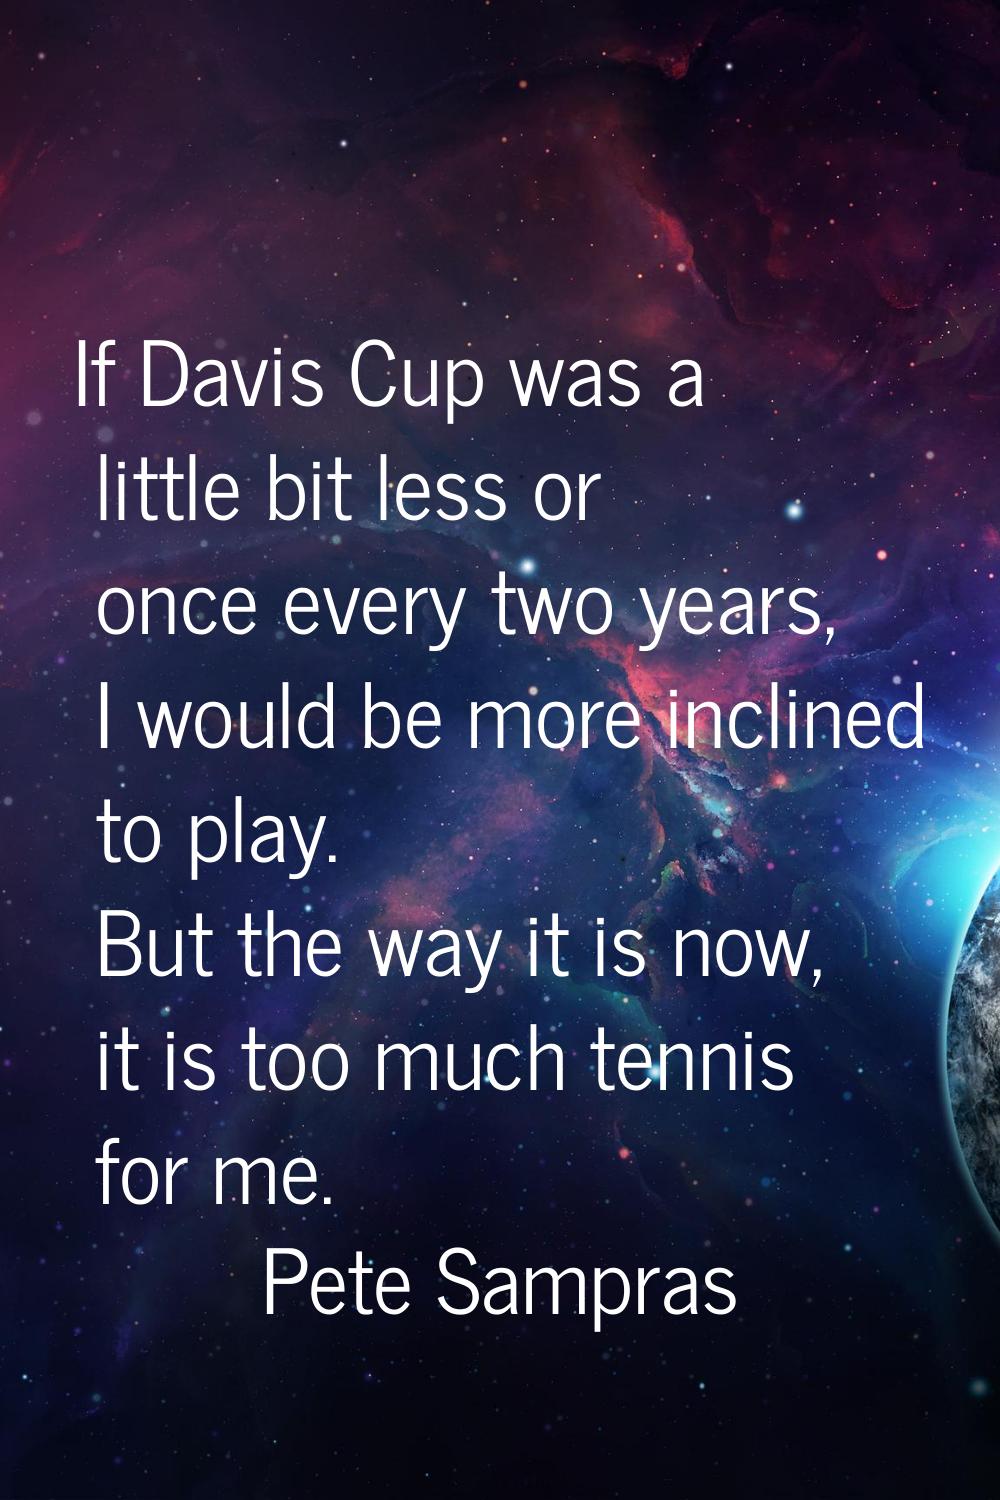 If Davis Cup was a little bit less or once every two years, I would be more inclined to play. But t